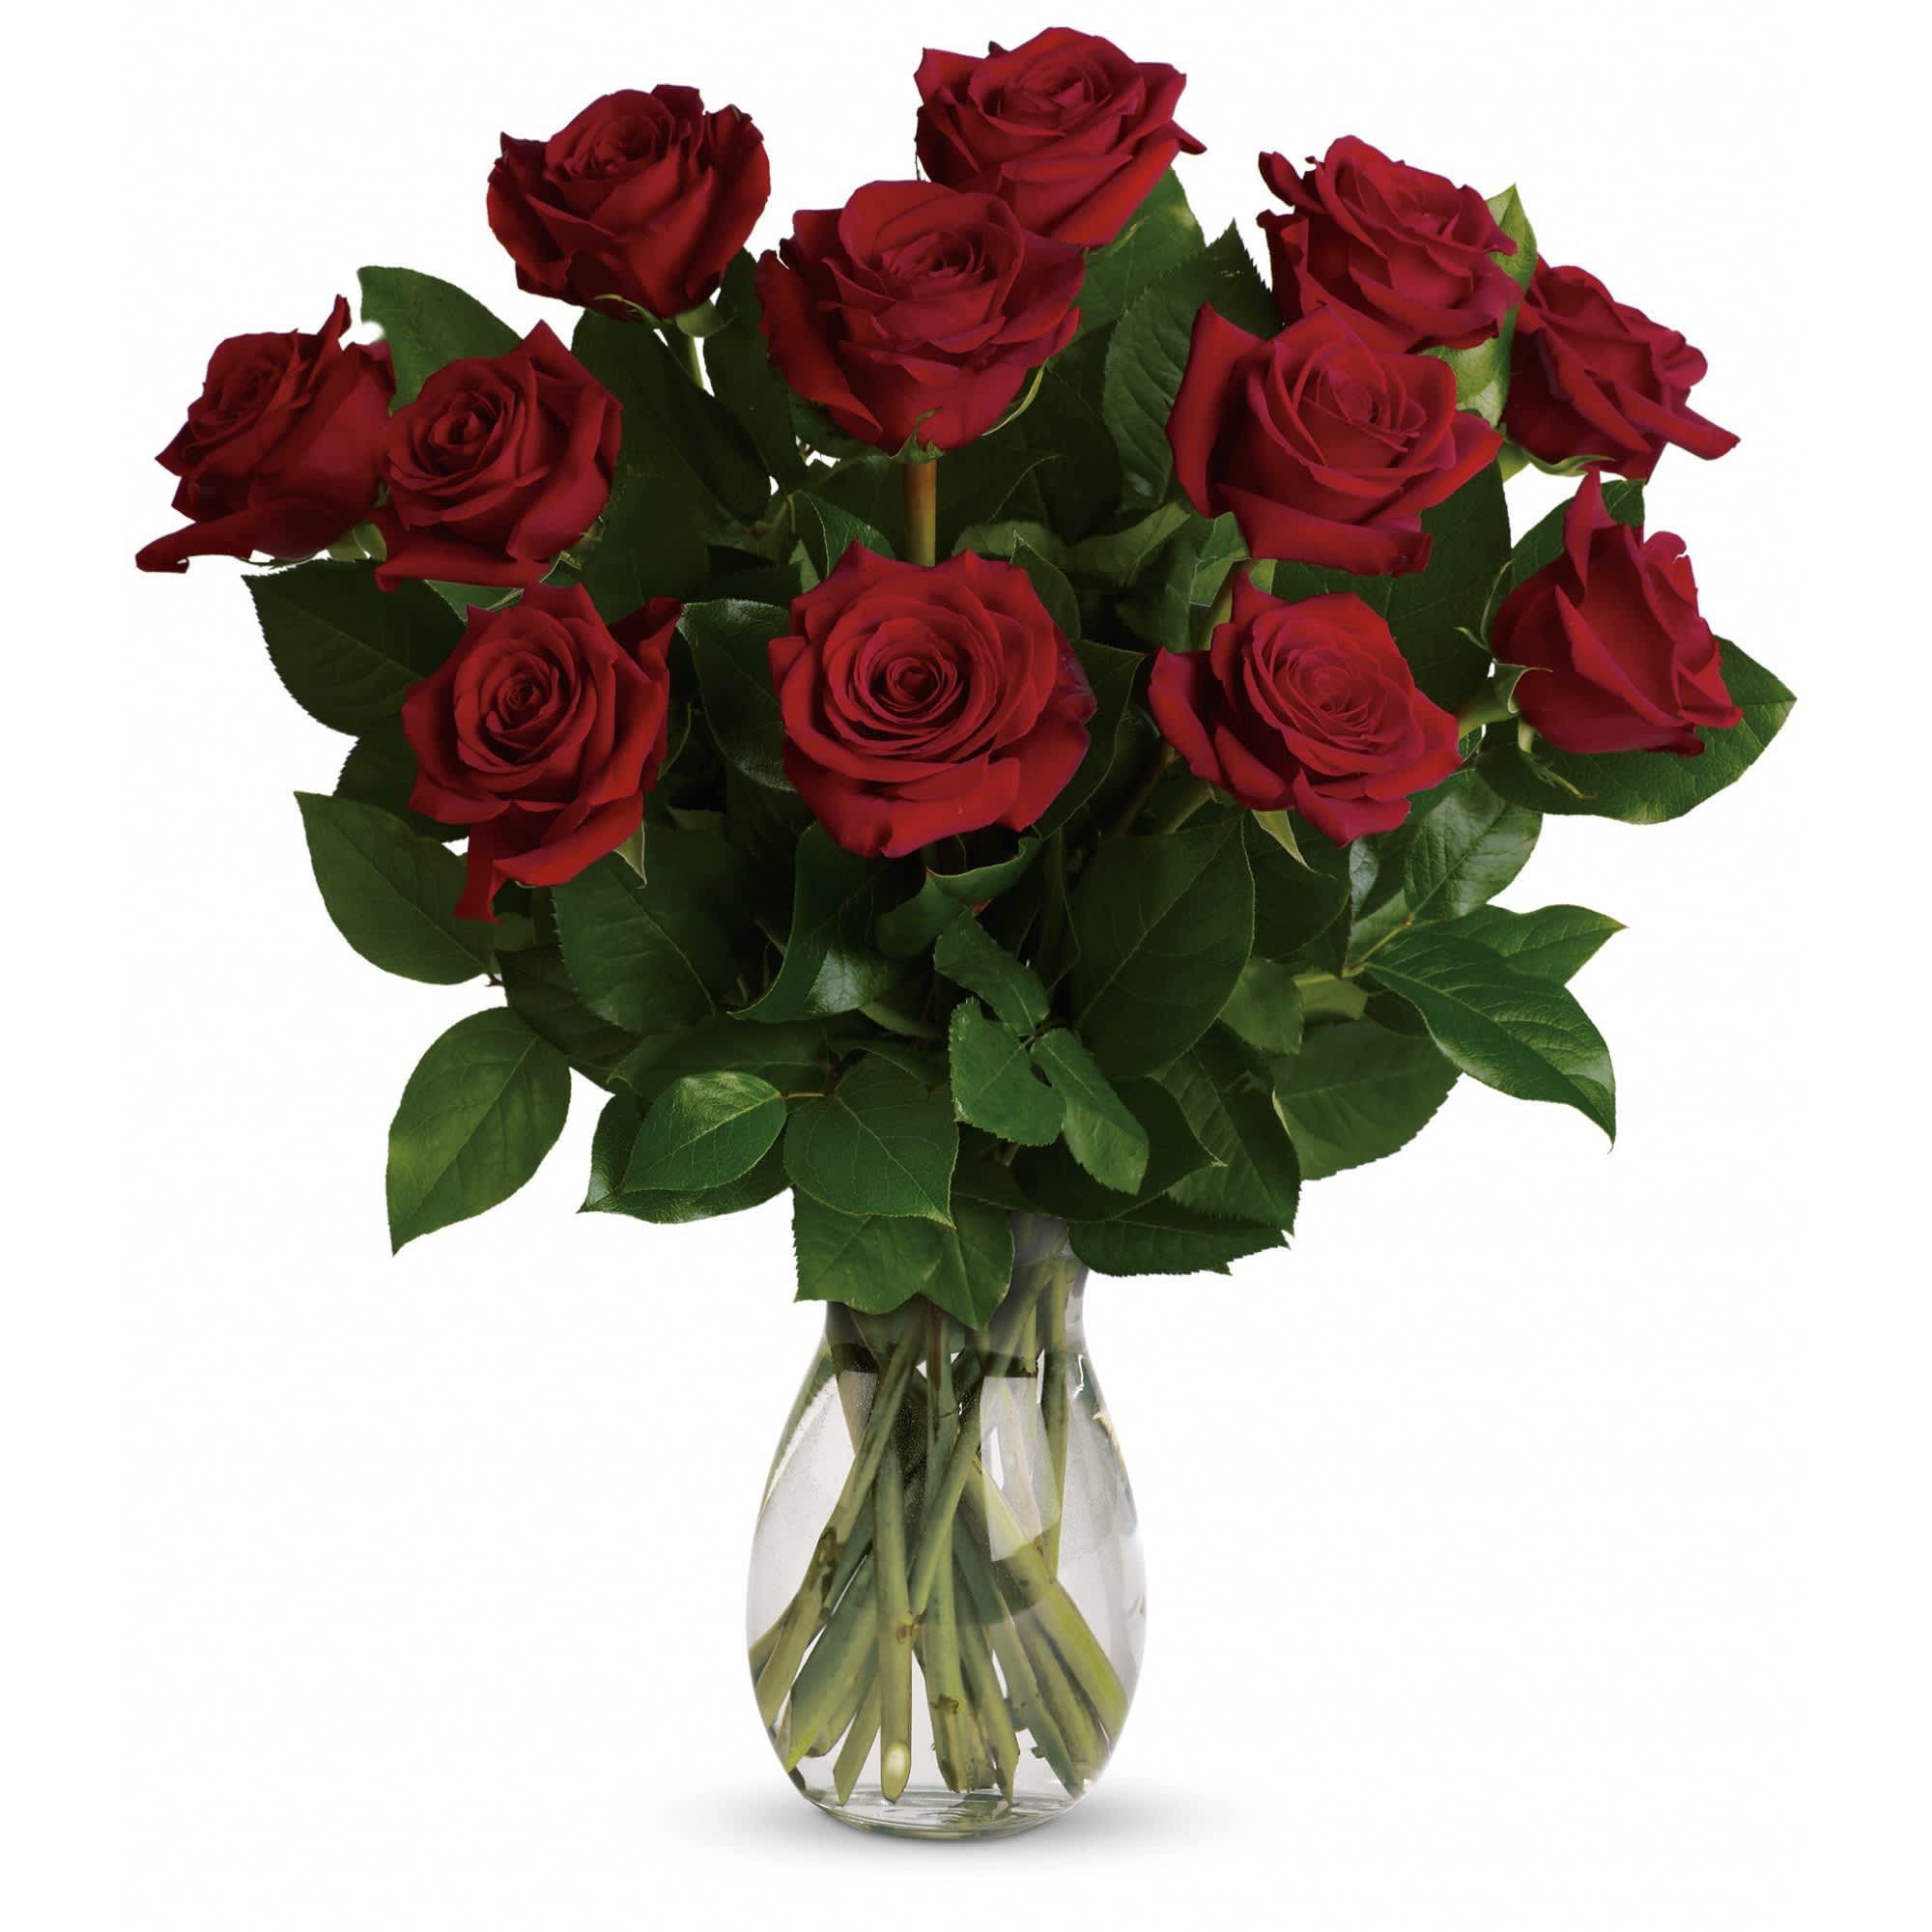 My True Love Bouquet with Long Stemmed Roses - Your devotion, delivered. Surprise your special one with this gorgeous arrangement of one dozen long stem red roses. It's a timeless testimony of your love she won't soon forget.